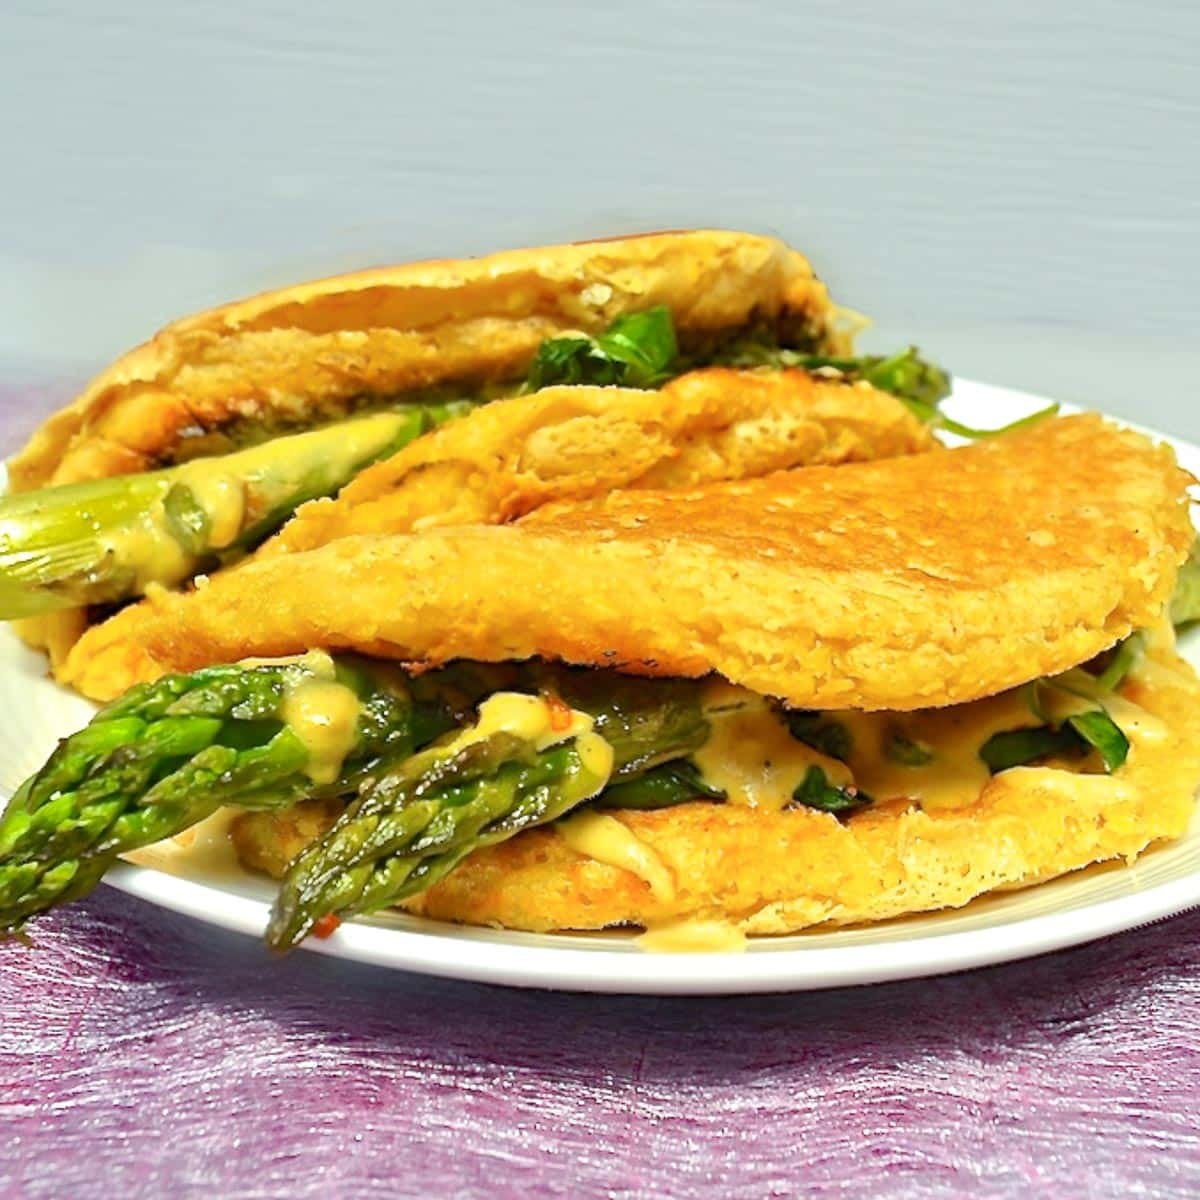 a vegan omelette stuffed with asparagus and dairy-free cheese sauce